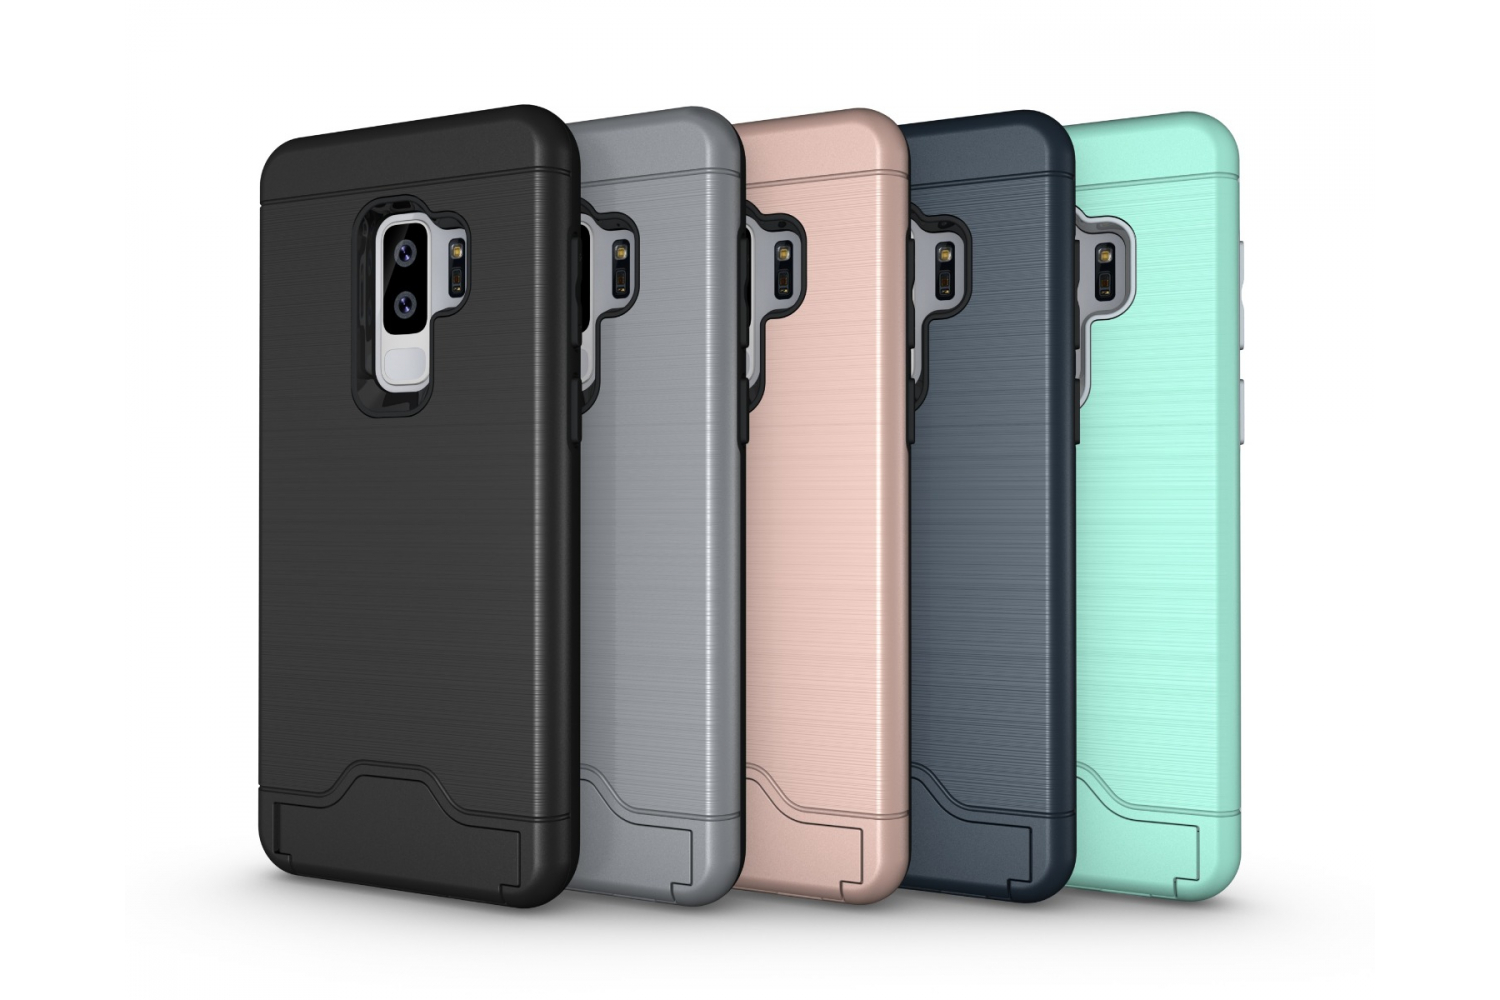 Samsung Galaxy S9 Plus Back Cover Case Zilver